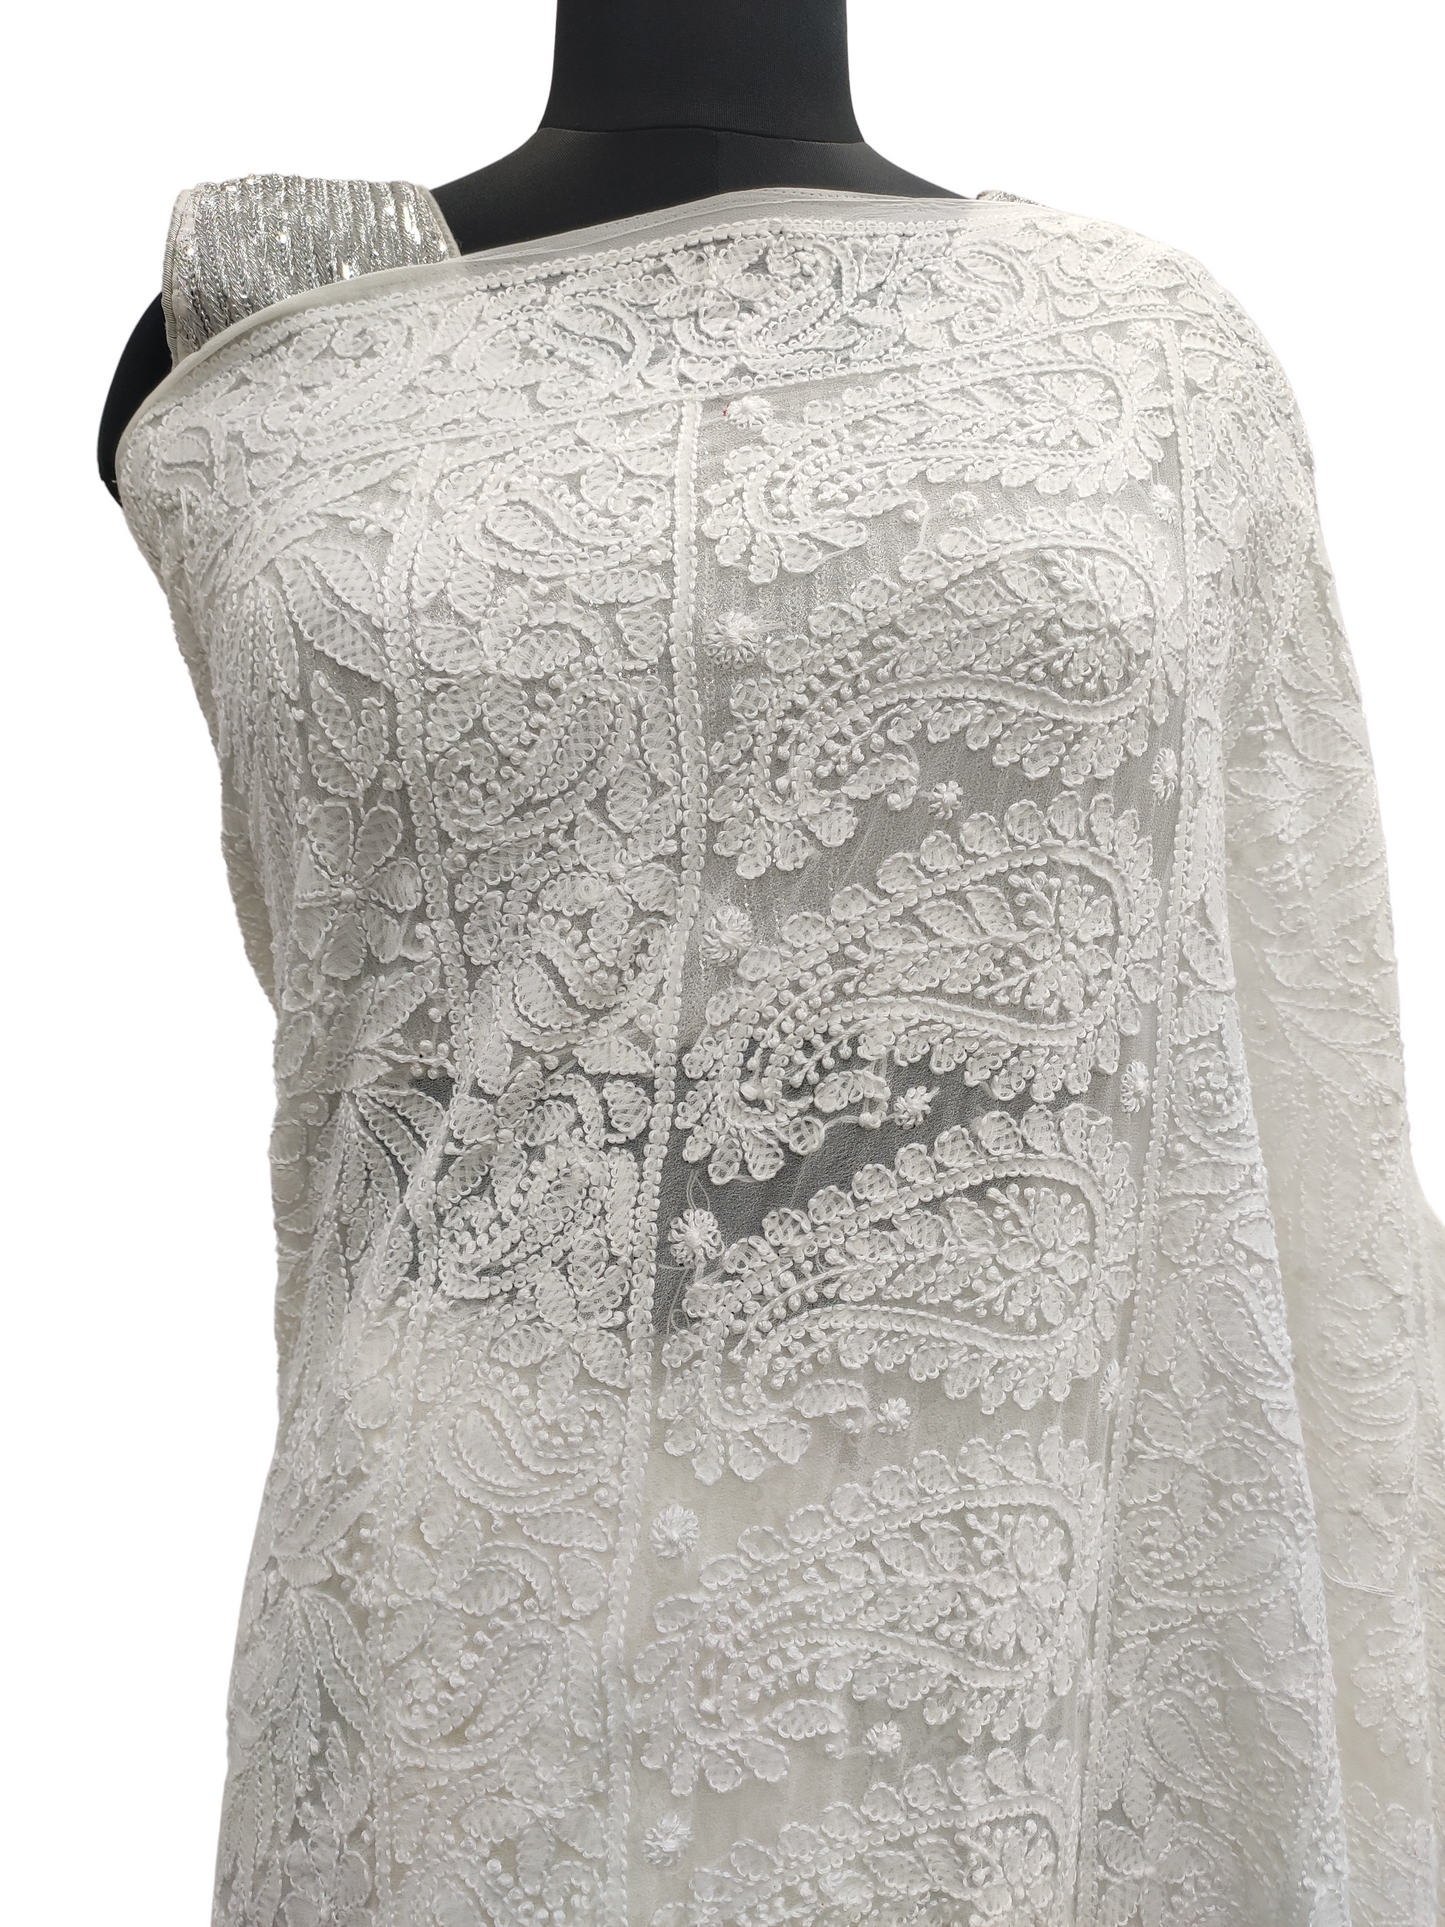 Shyamal Chikan Hand Embroidered Lemon Georgette Lucknowi Chikankari Full Jaal Saree With Blouse Piece - S10850